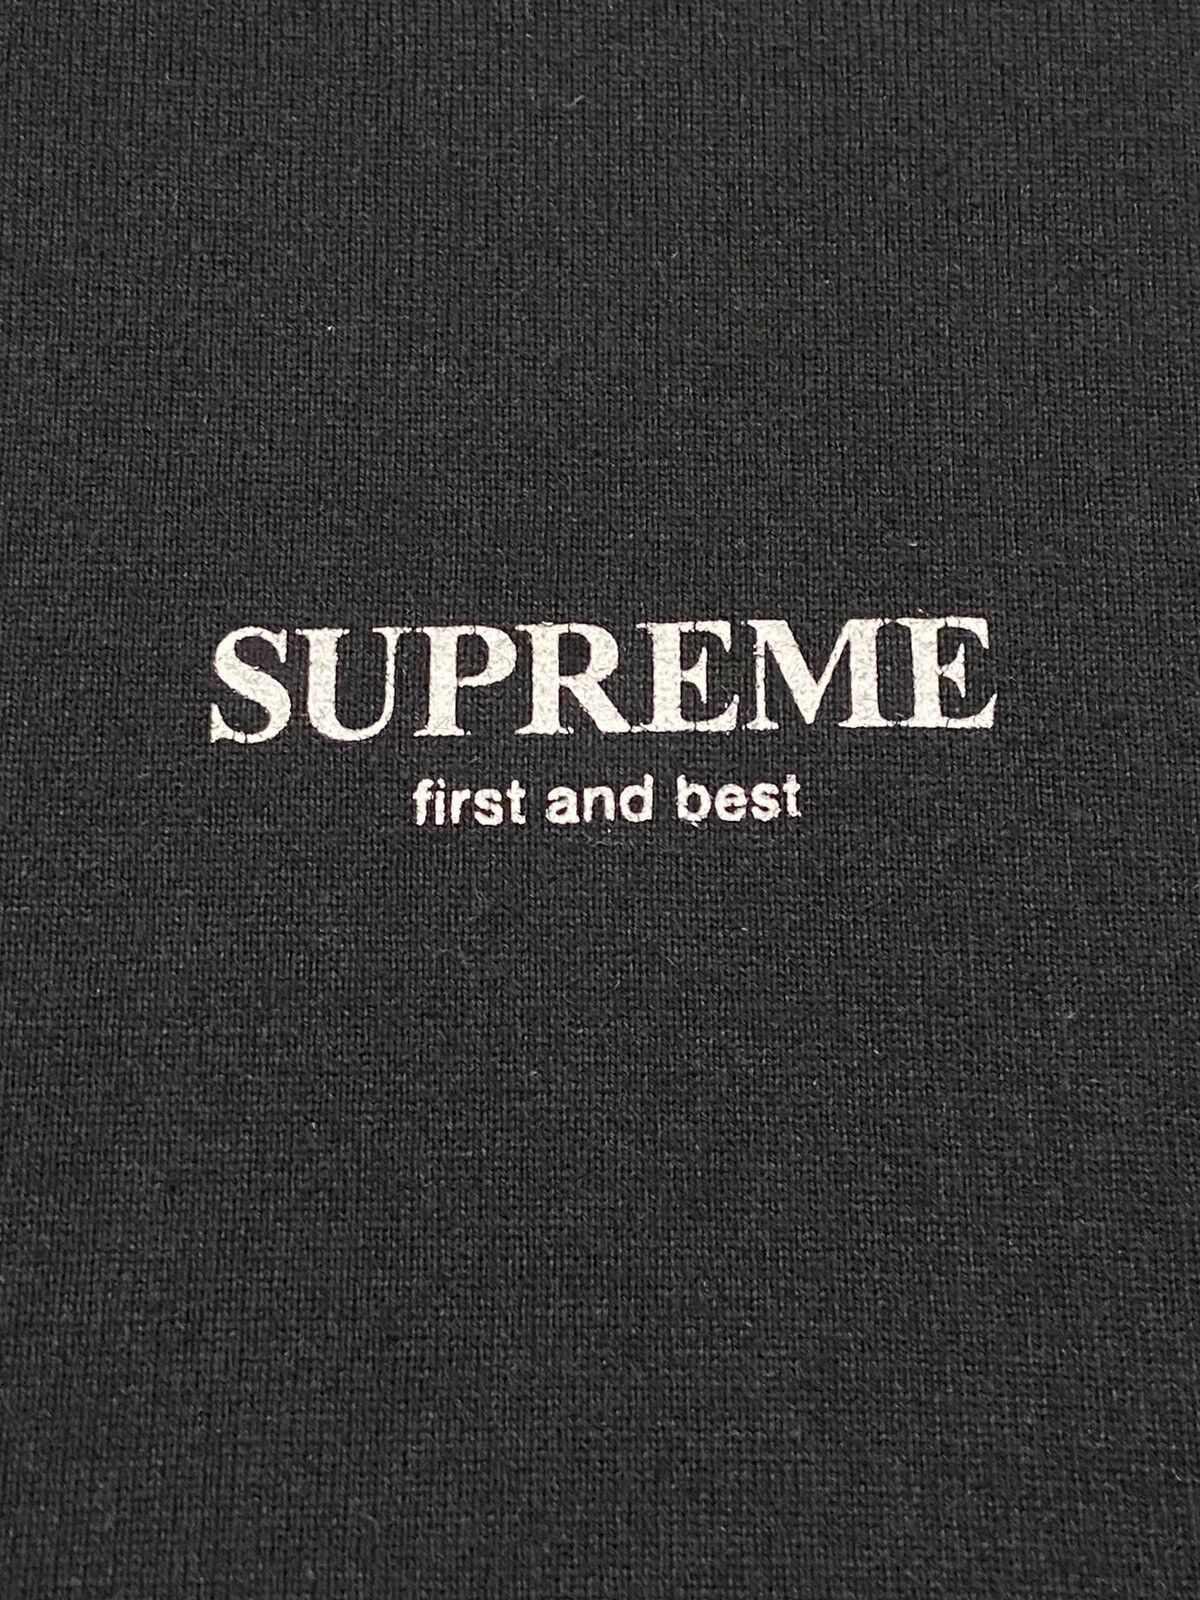 Supreme FW18 First and Best Tee - 5